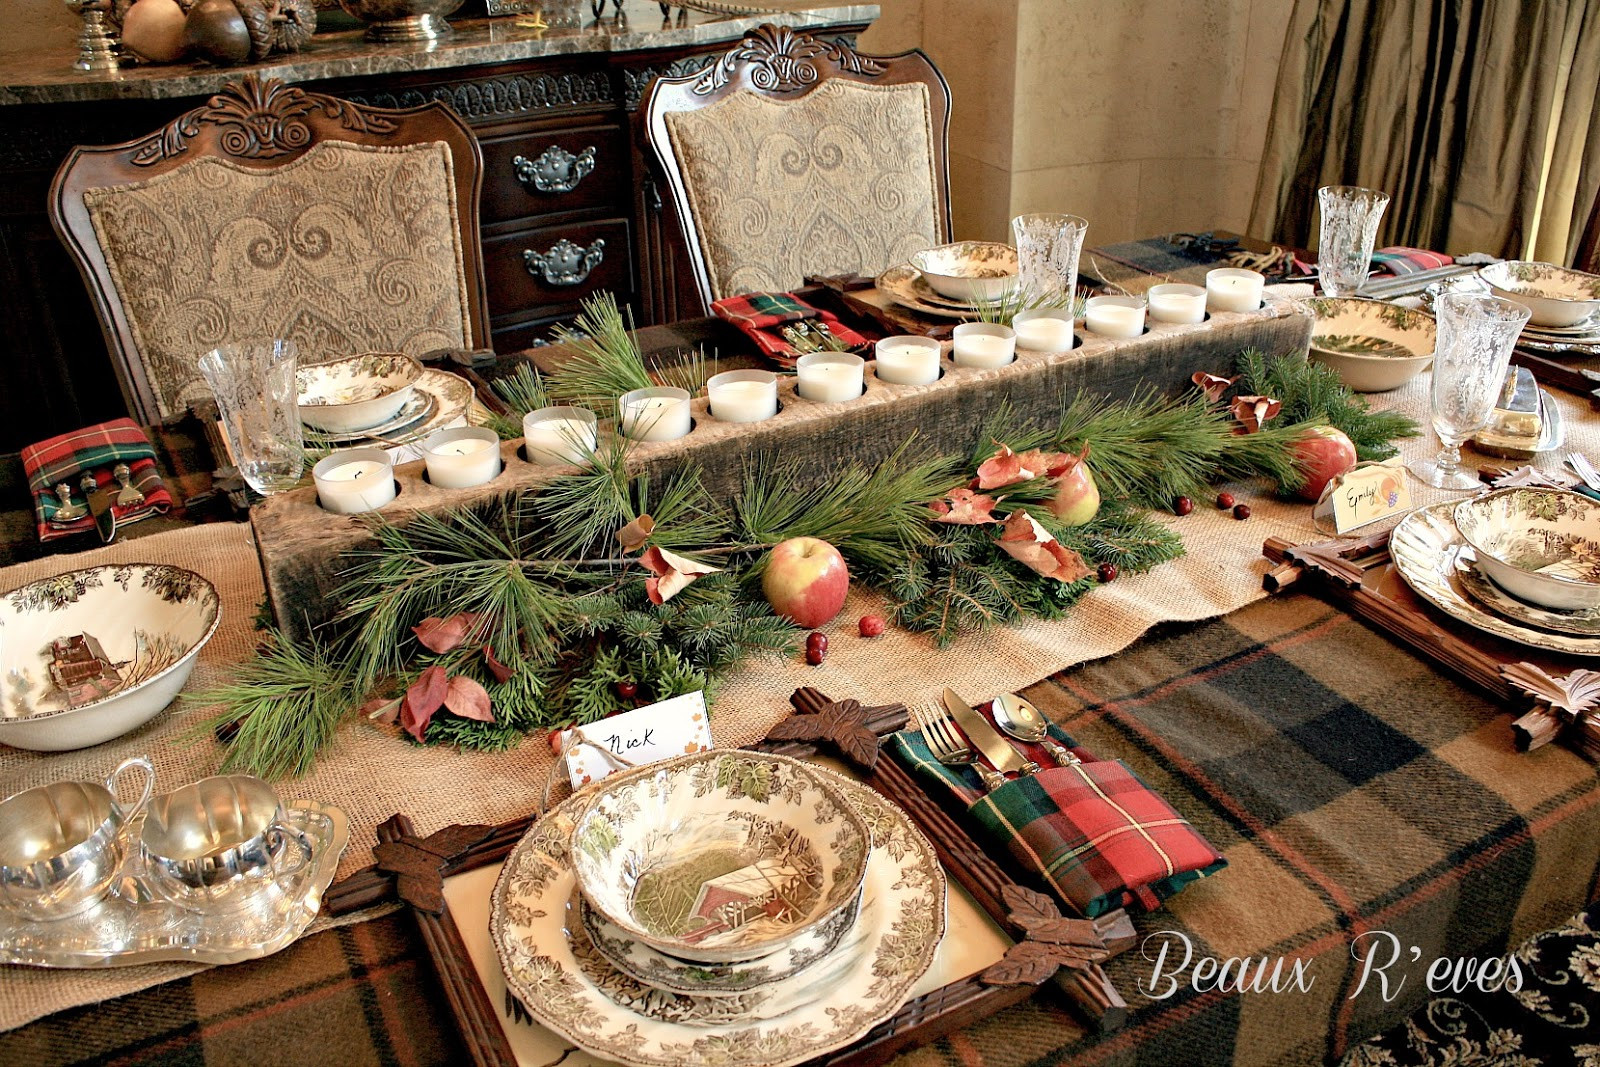 Rustic Thanksgiving Decor
 Beaux R eves Rustic Thanksgiving Table